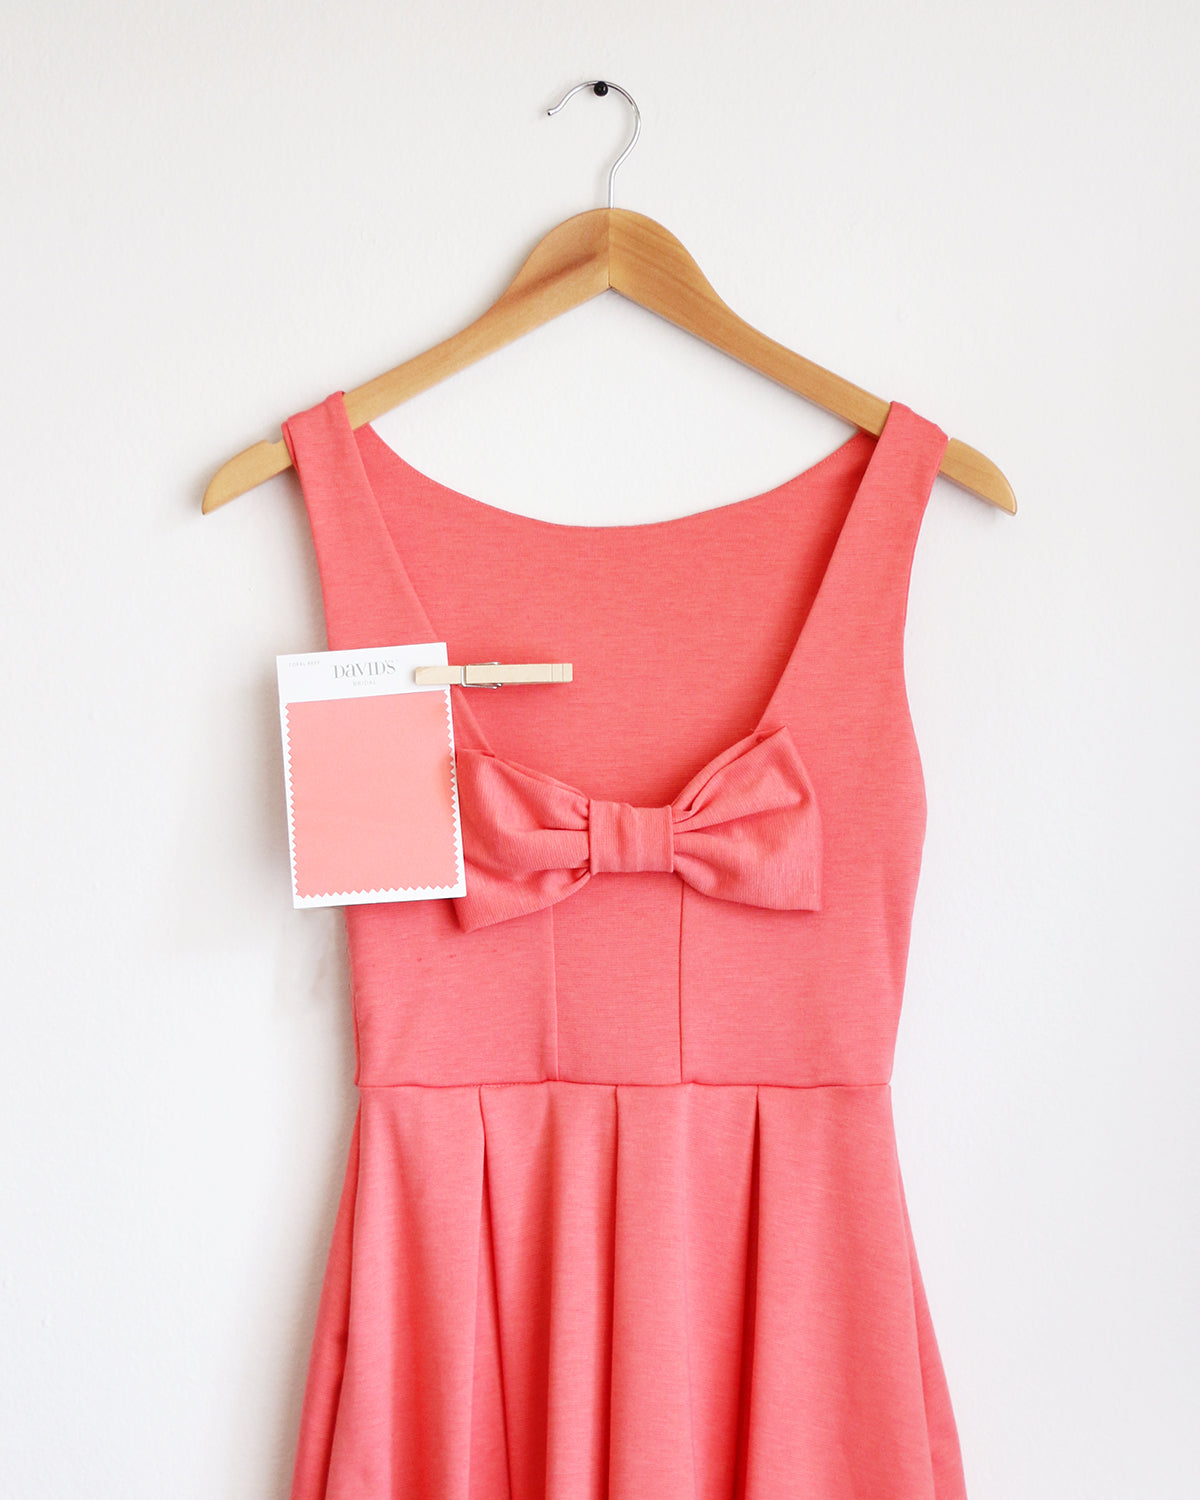 Apricity - JANUARY Dress in Watermelon - David's Bridal Coral Reef bridesmaid dress swatch